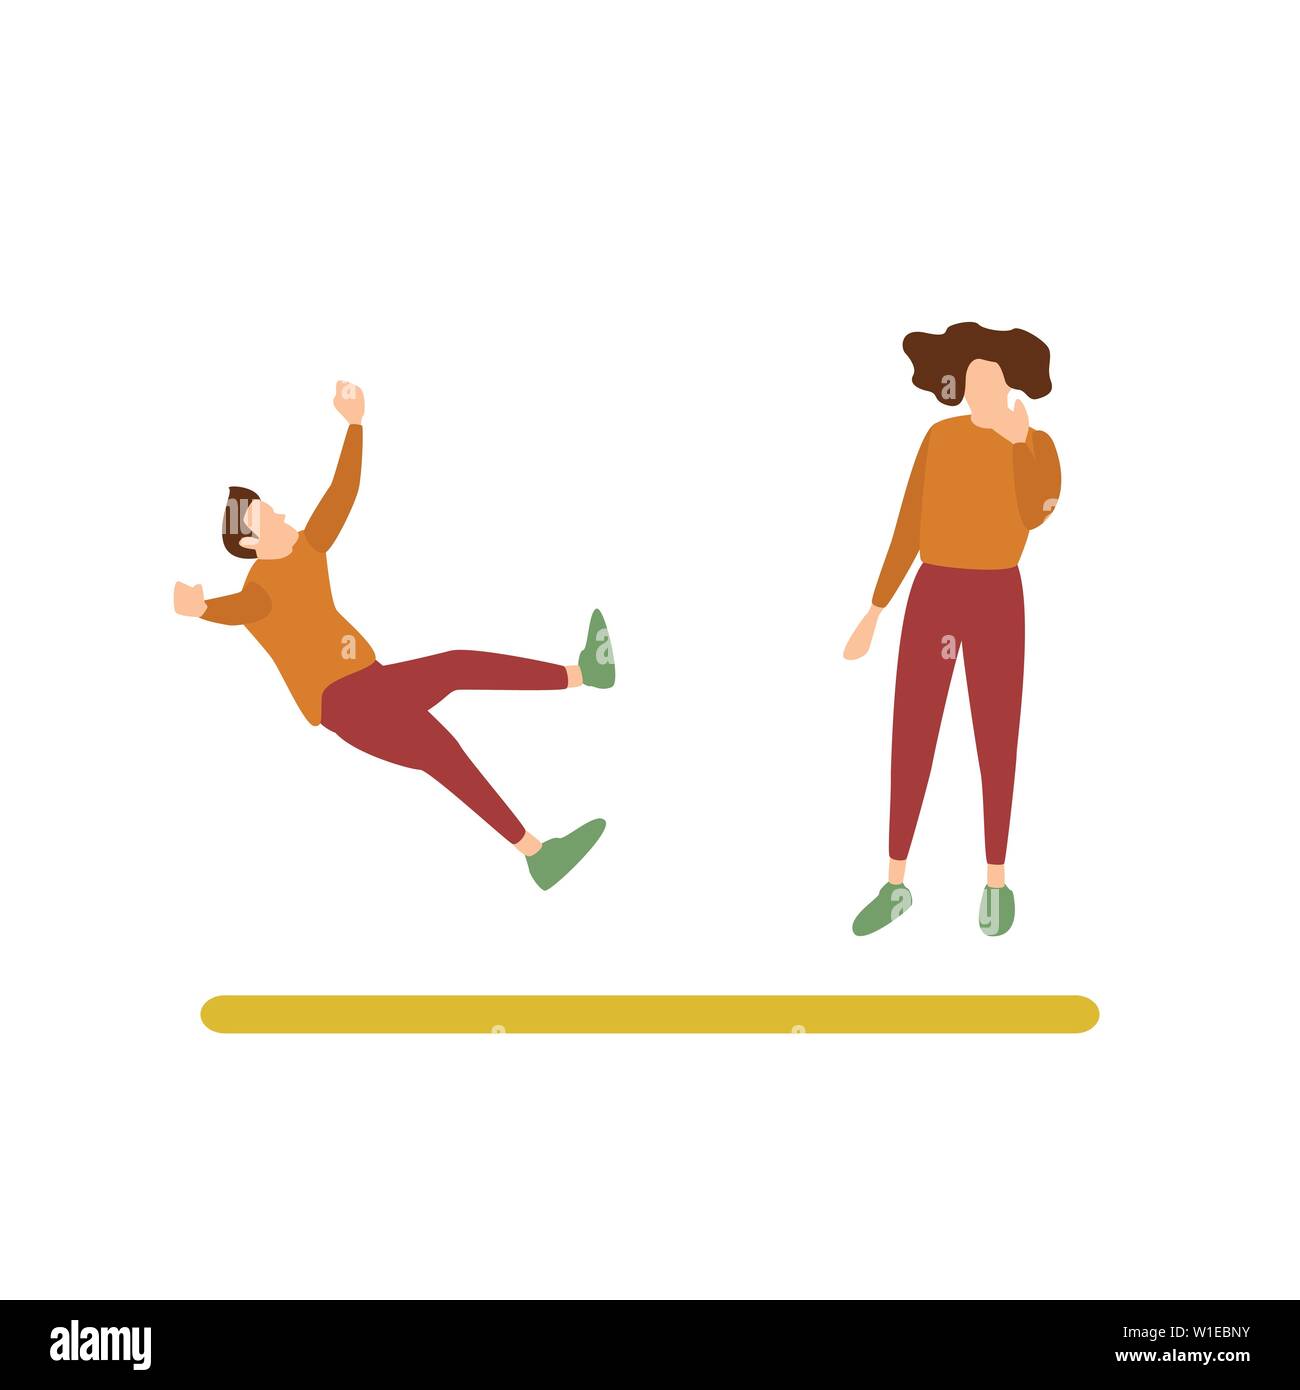 Flat Design Character of a Woman Laugh at a Fallen Guy, Human Activities Expression Stock Vector